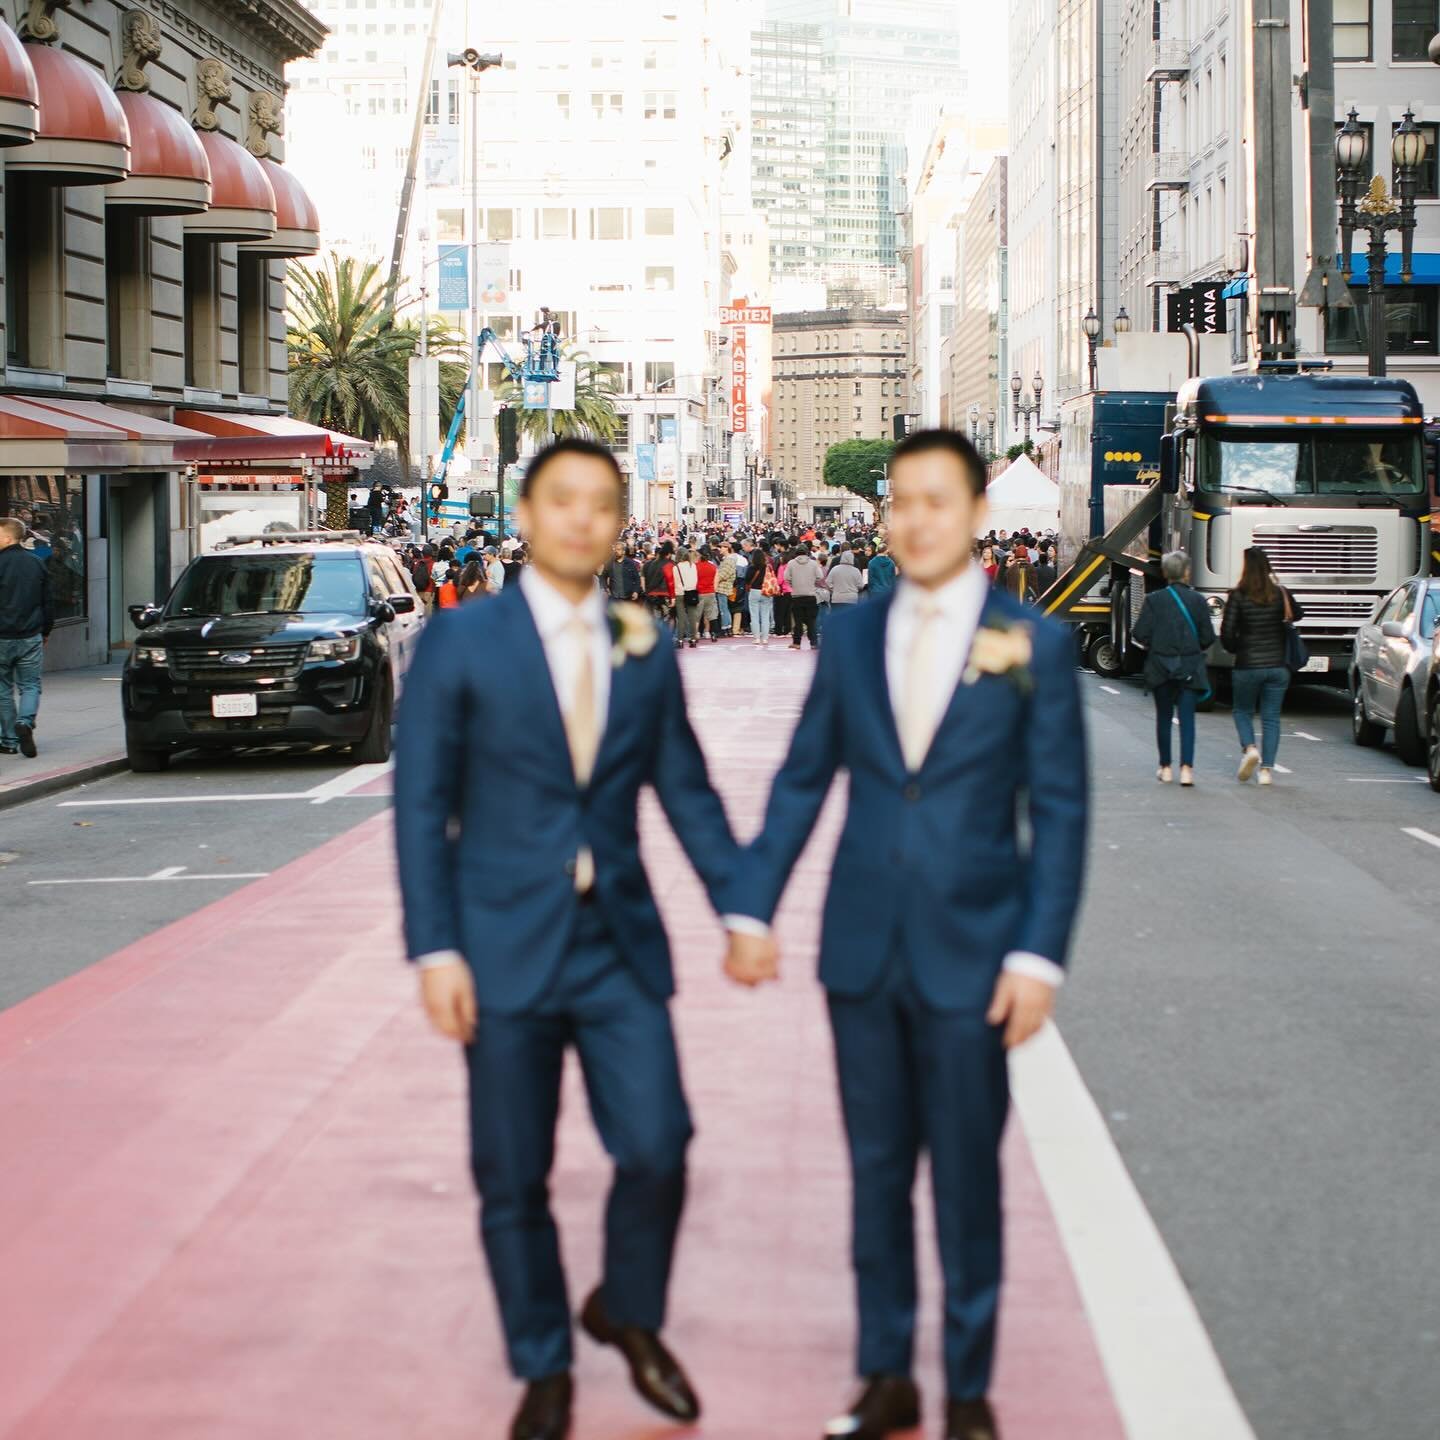 A closure on one of SF&rsquo;s busiest downtown streets gave us a film set feel in Union Square for our couple&rsquo;s wedding day, set amid the fanfare of the Chinese New Year parade. Later guests were treated to amazing views of a fireworks show fr